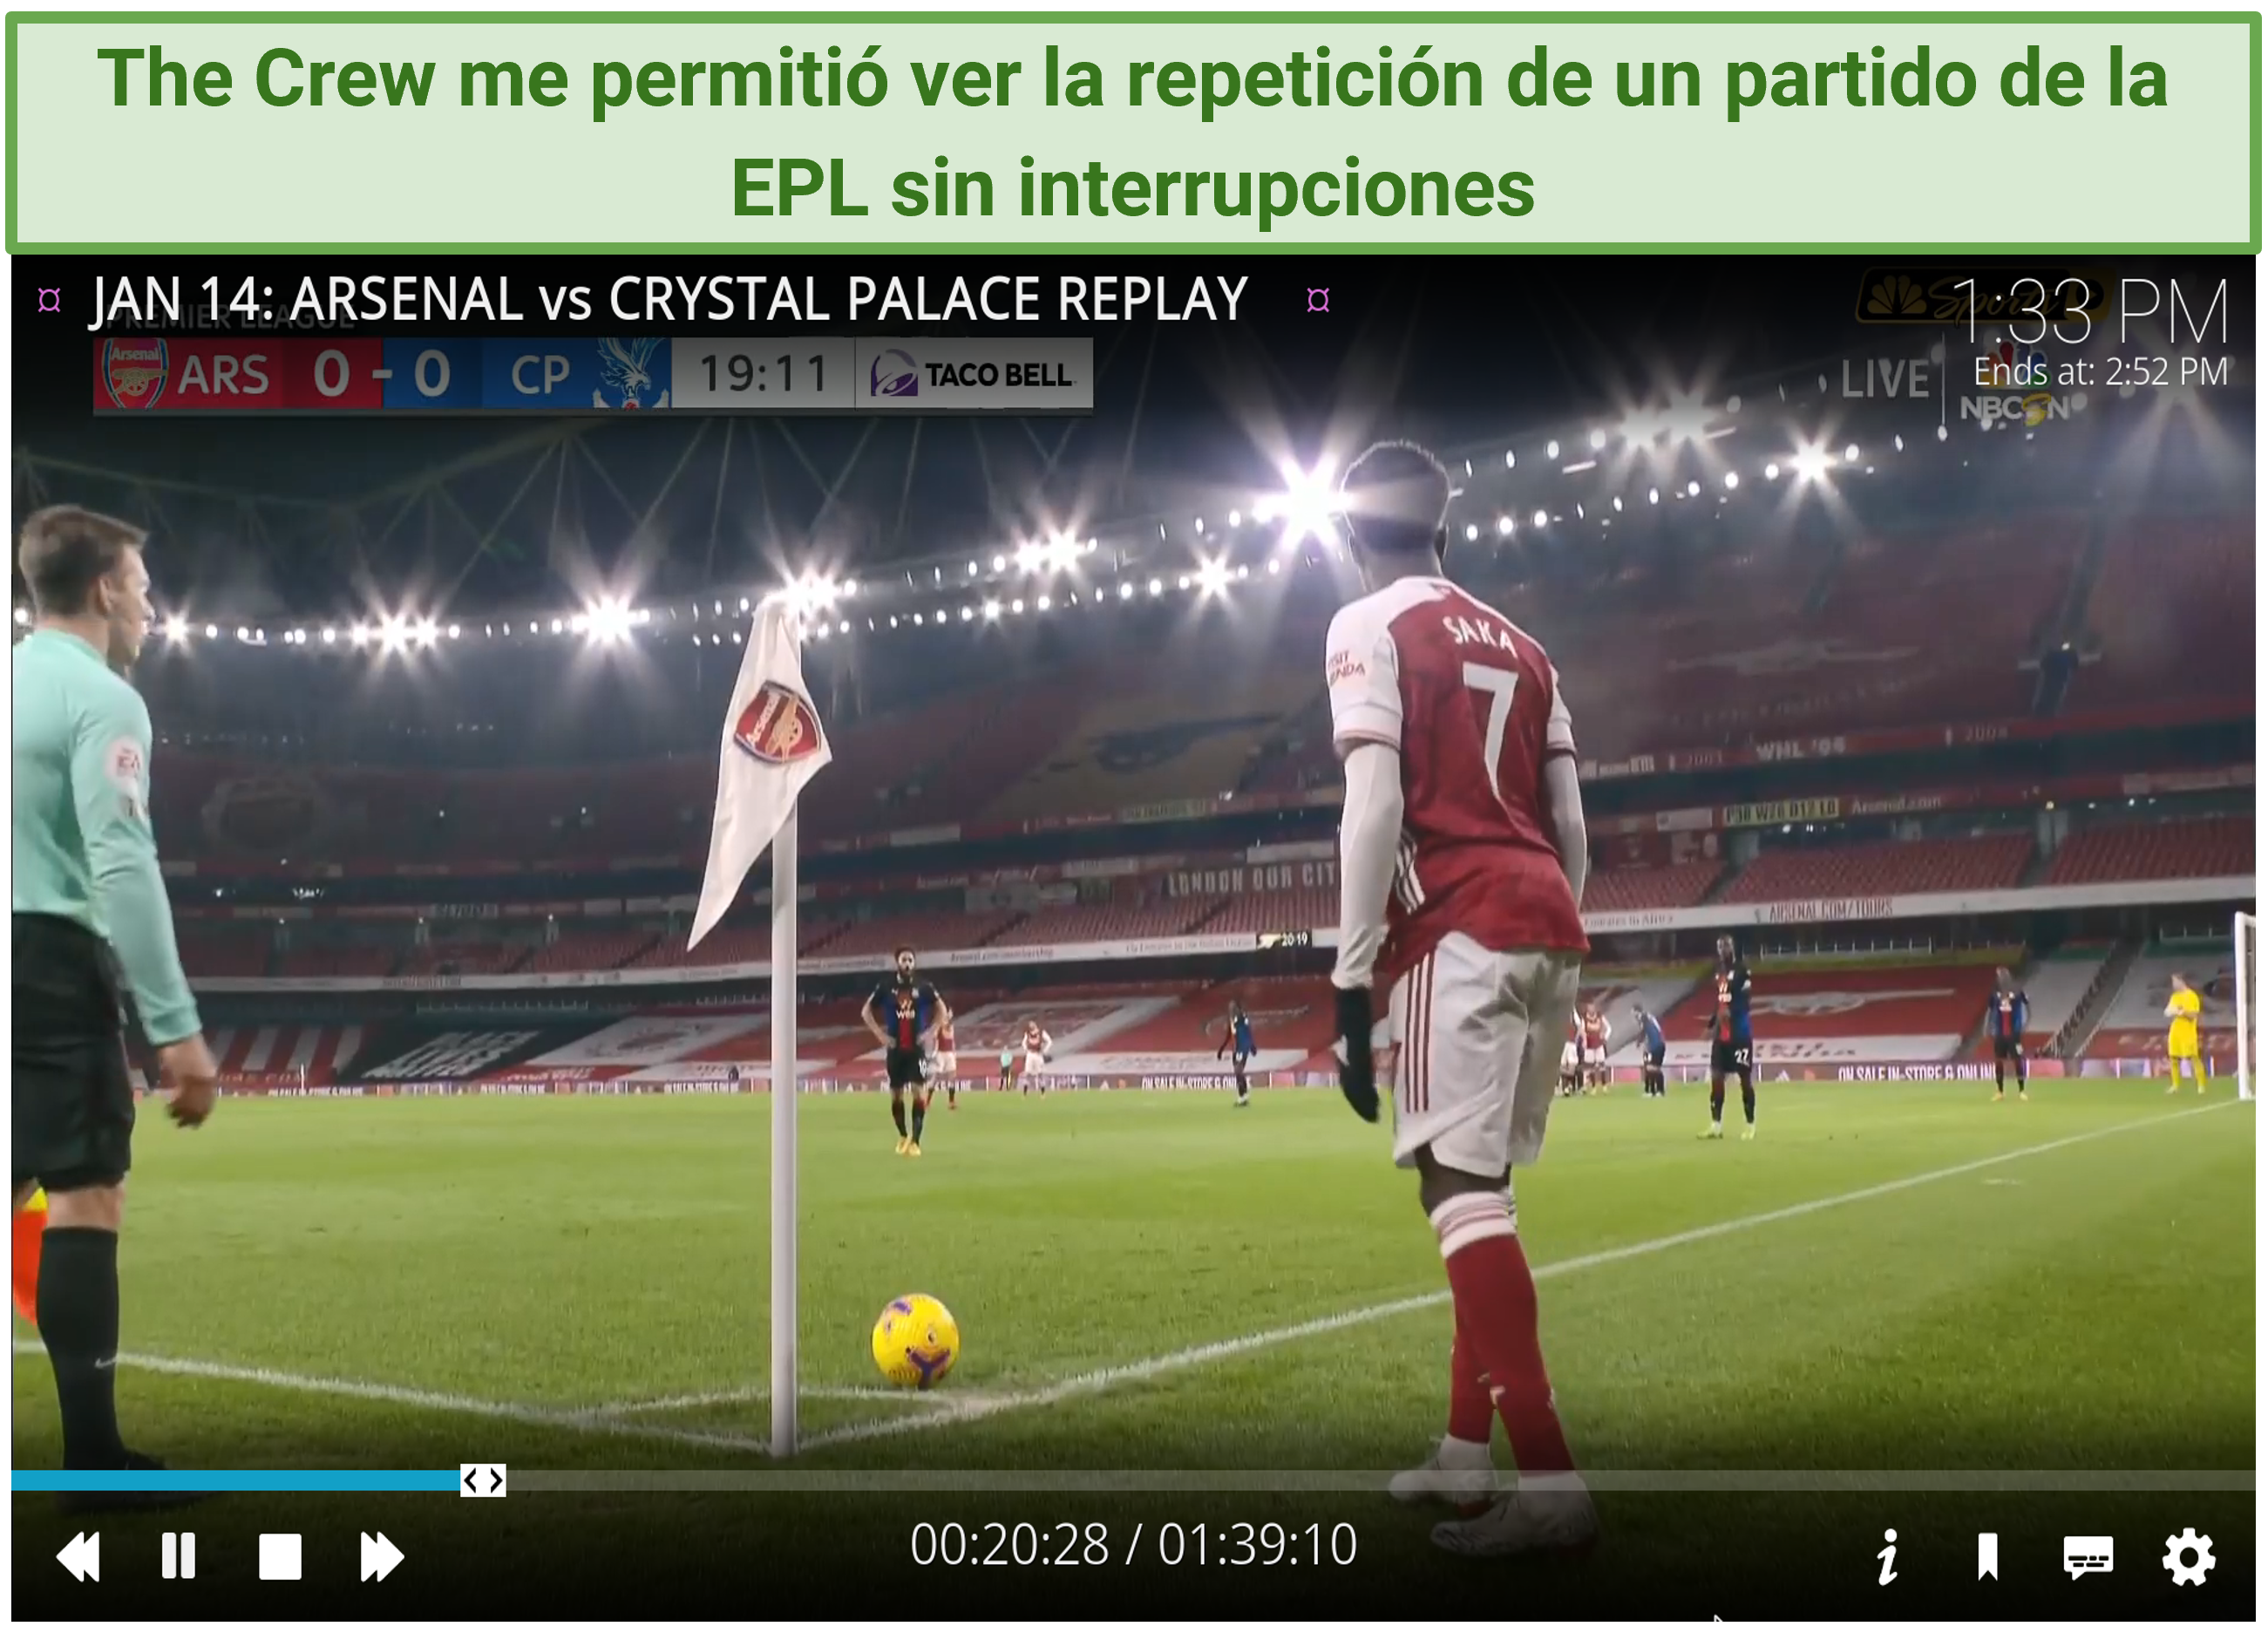 A screenshot showing the Crew addon lets me stream a replay of a Premier League match buffer-free